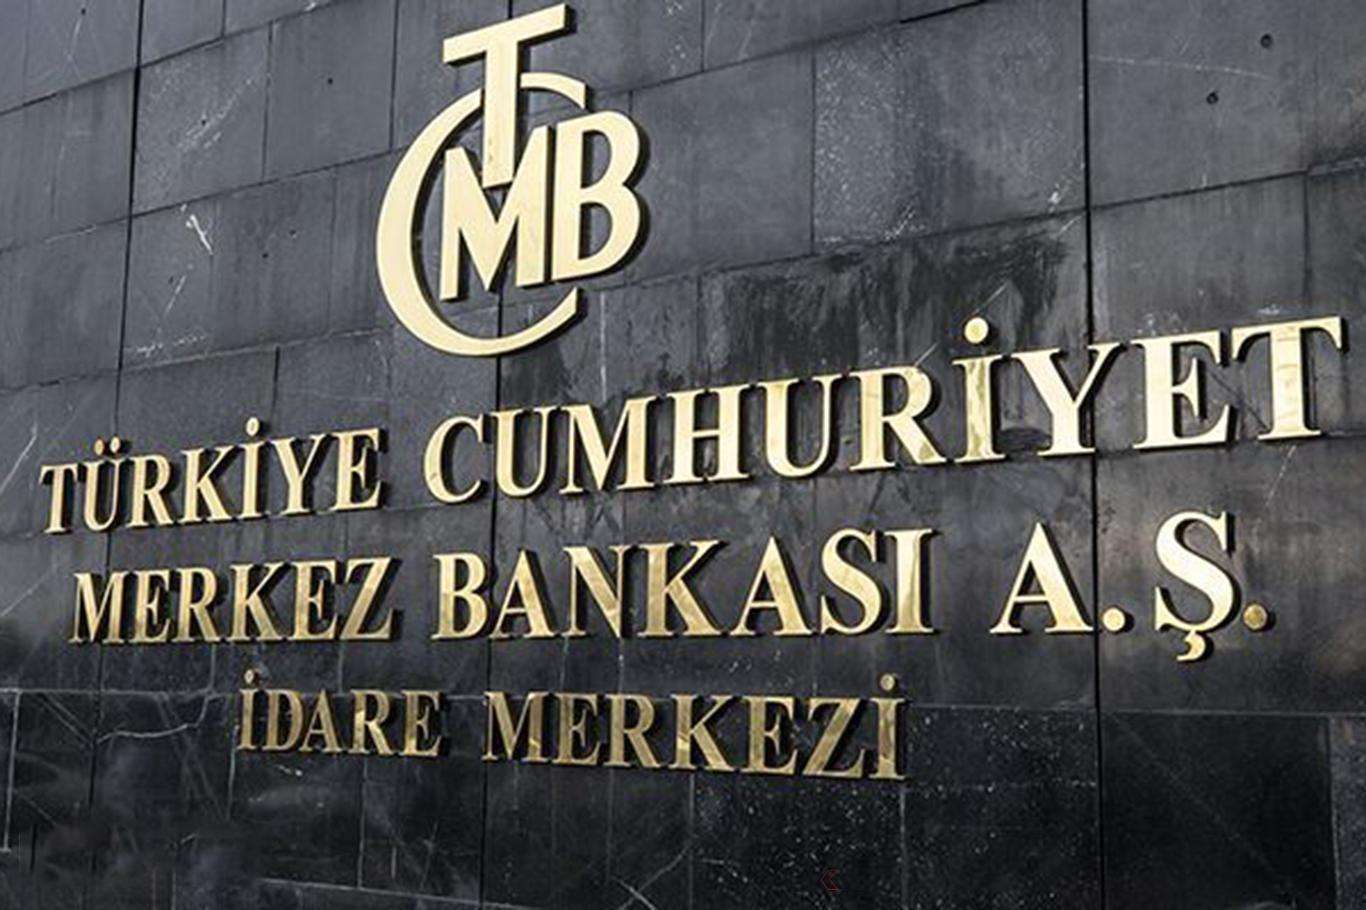 Turkey's central bank cut its key interest rate by 200 basis points